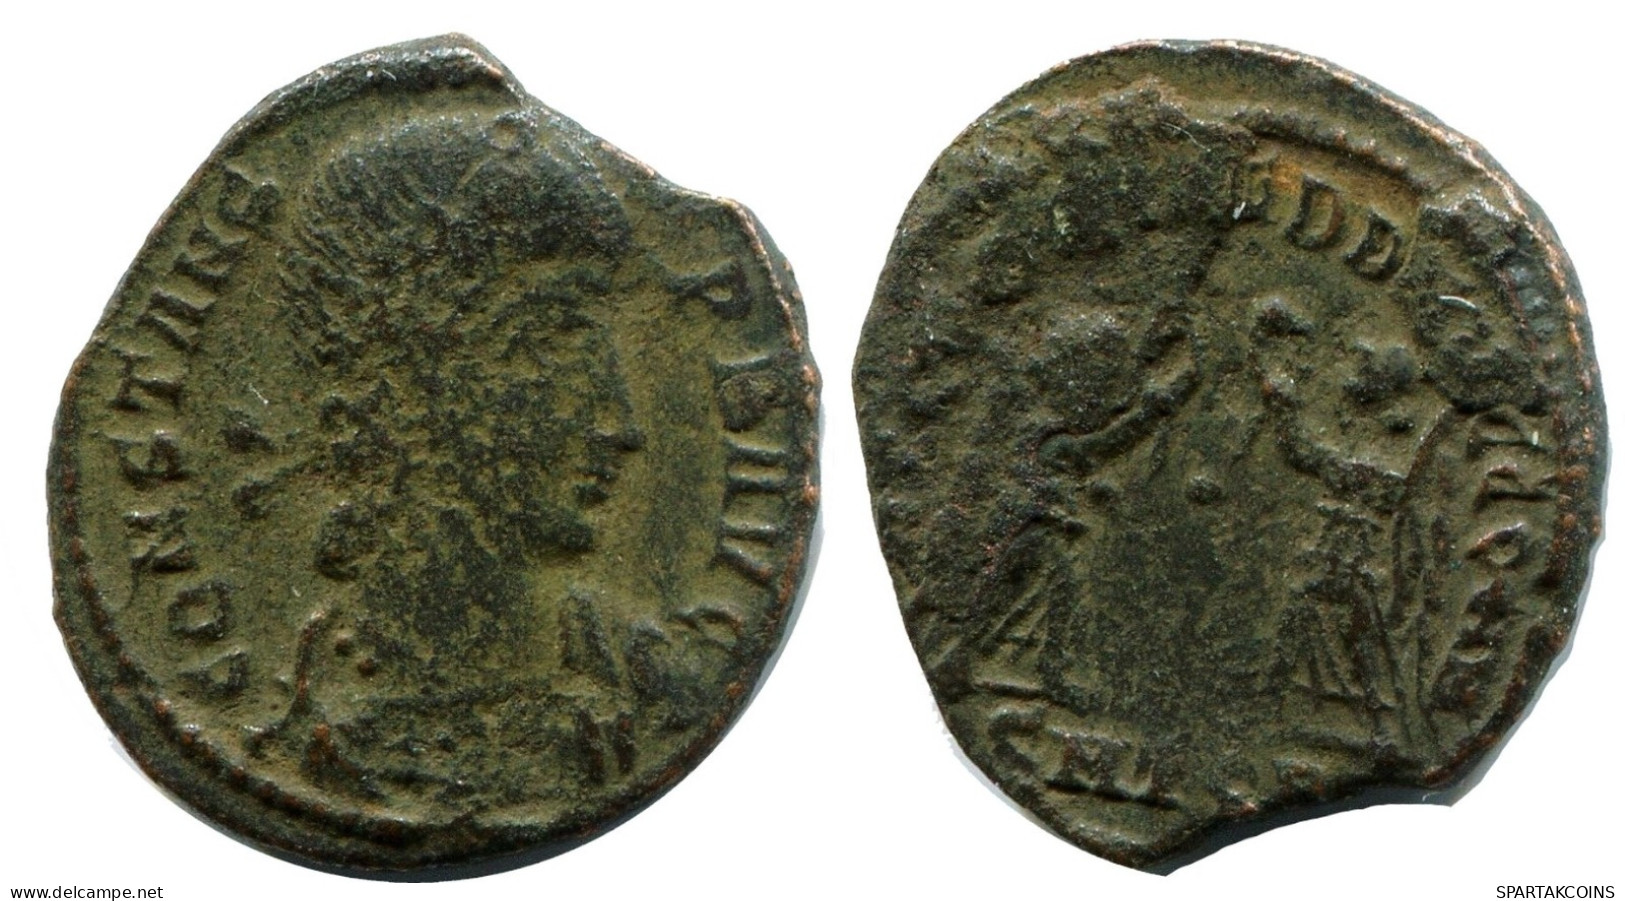 CONSTANS MINTED IN THESSALONICA FOUND IN IHNASYAH HOARD EGYPT #ANC11874.14.D.A - El Imperio Christiano (307 / 363)